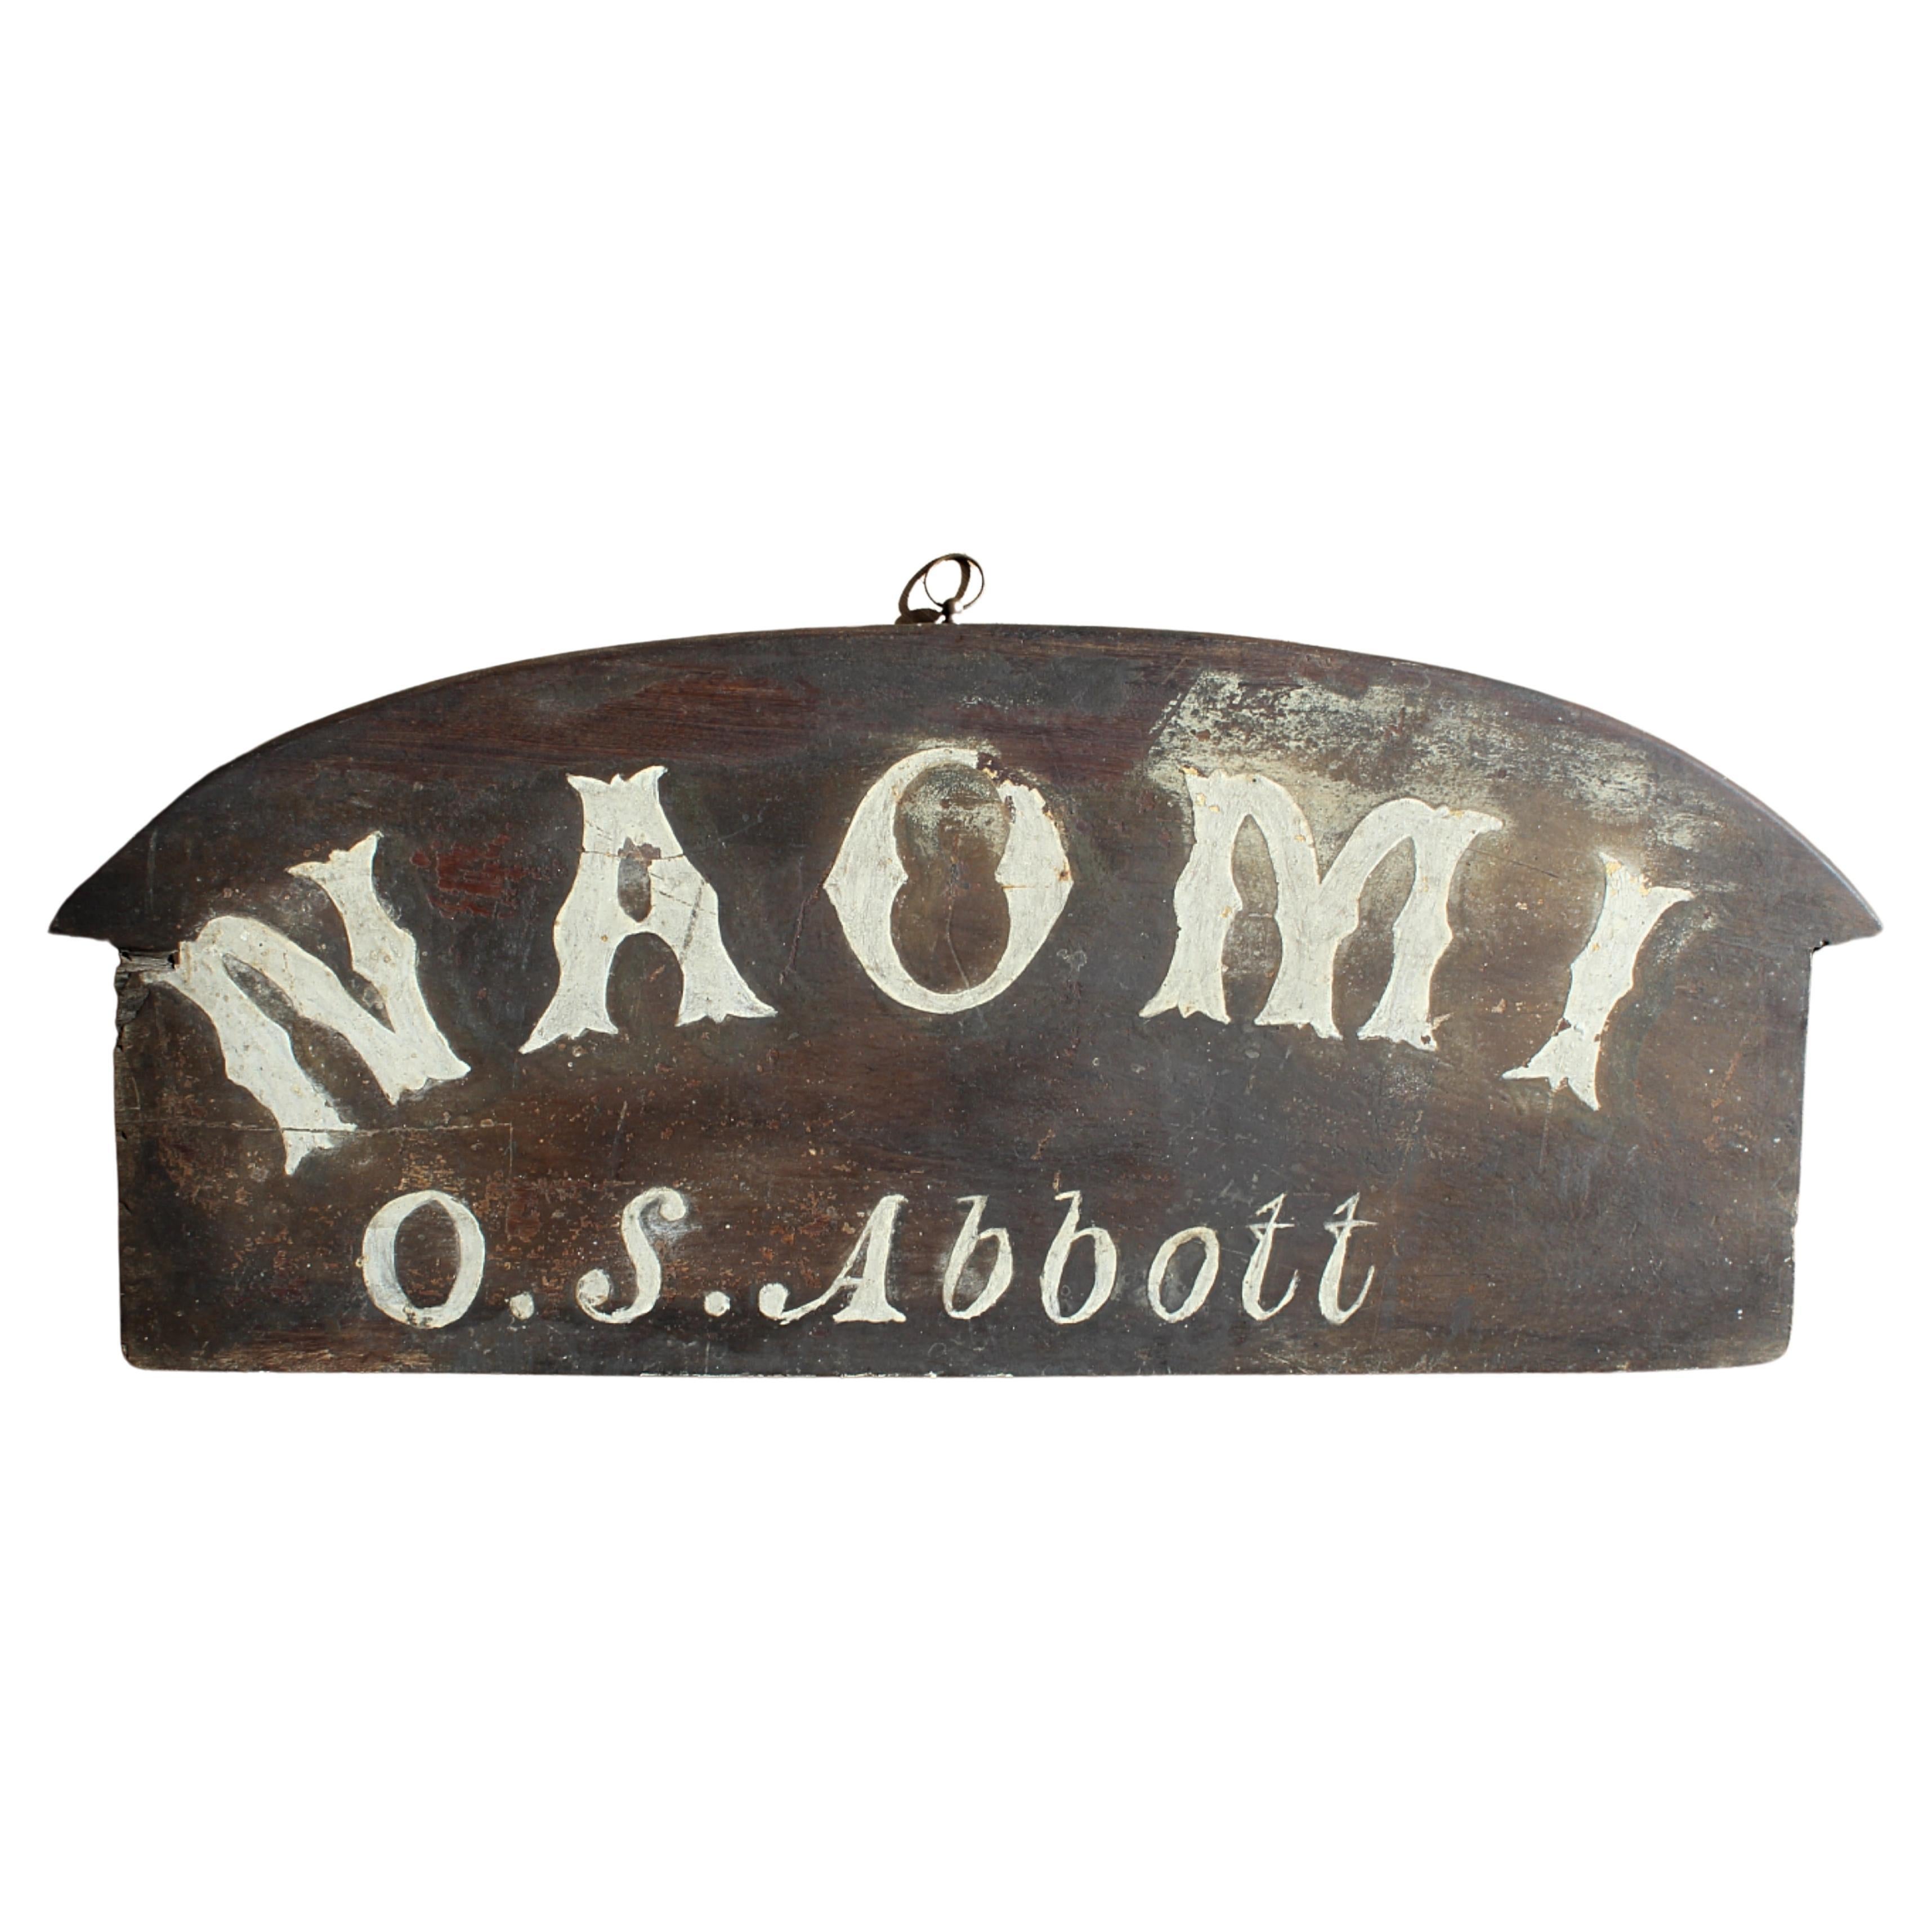 Early 20th C Stern Name Board "Naomi" Clovelly Fishing Boat Naval Maritime Ship For Sale